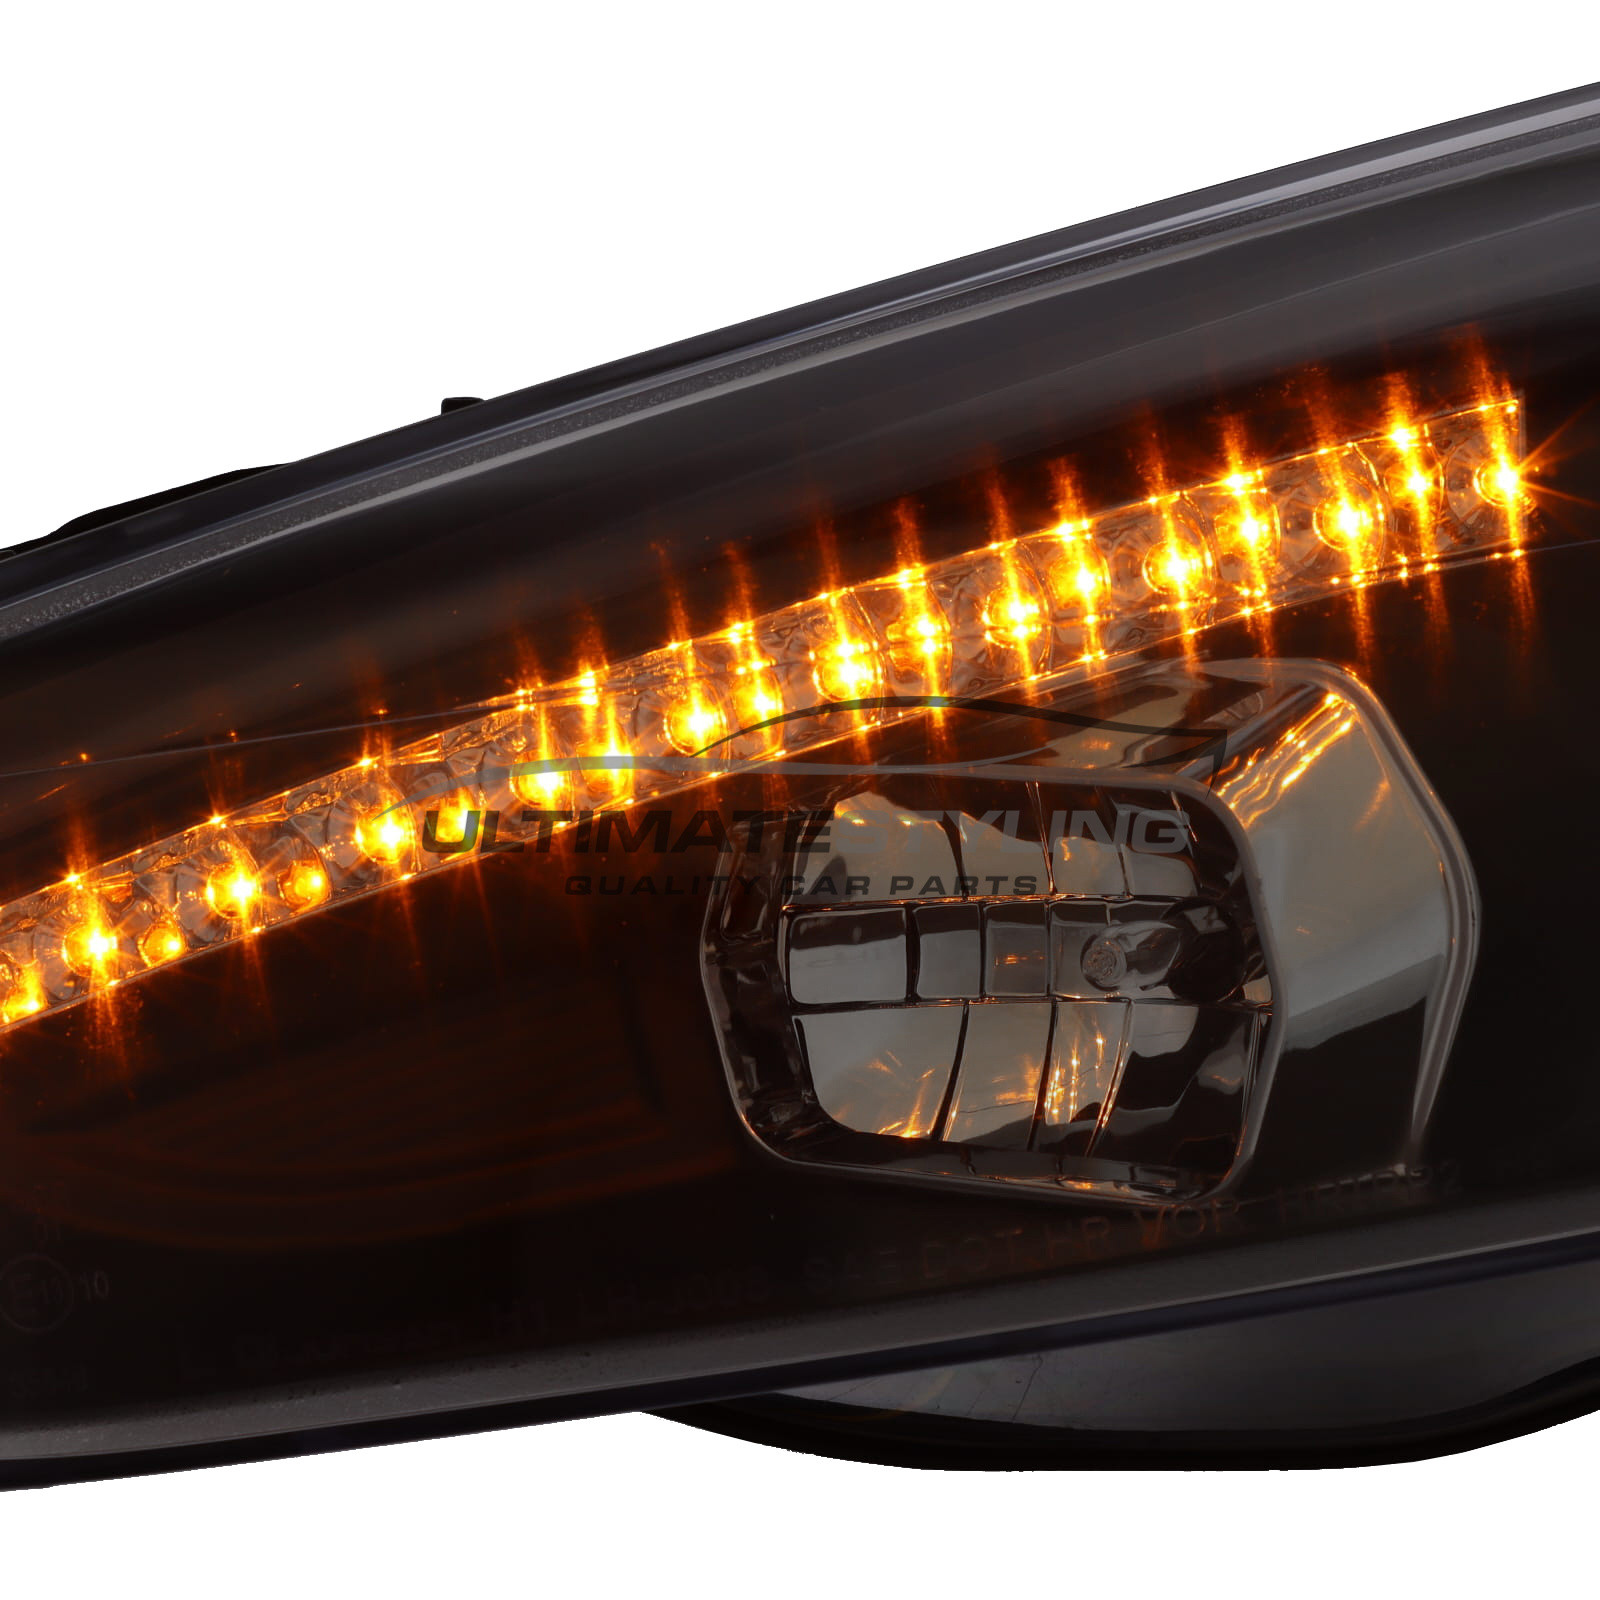 Ford Focus Performance Headlights - Projector Type - LED Daytime Running  Lights (DRL) - Halogen